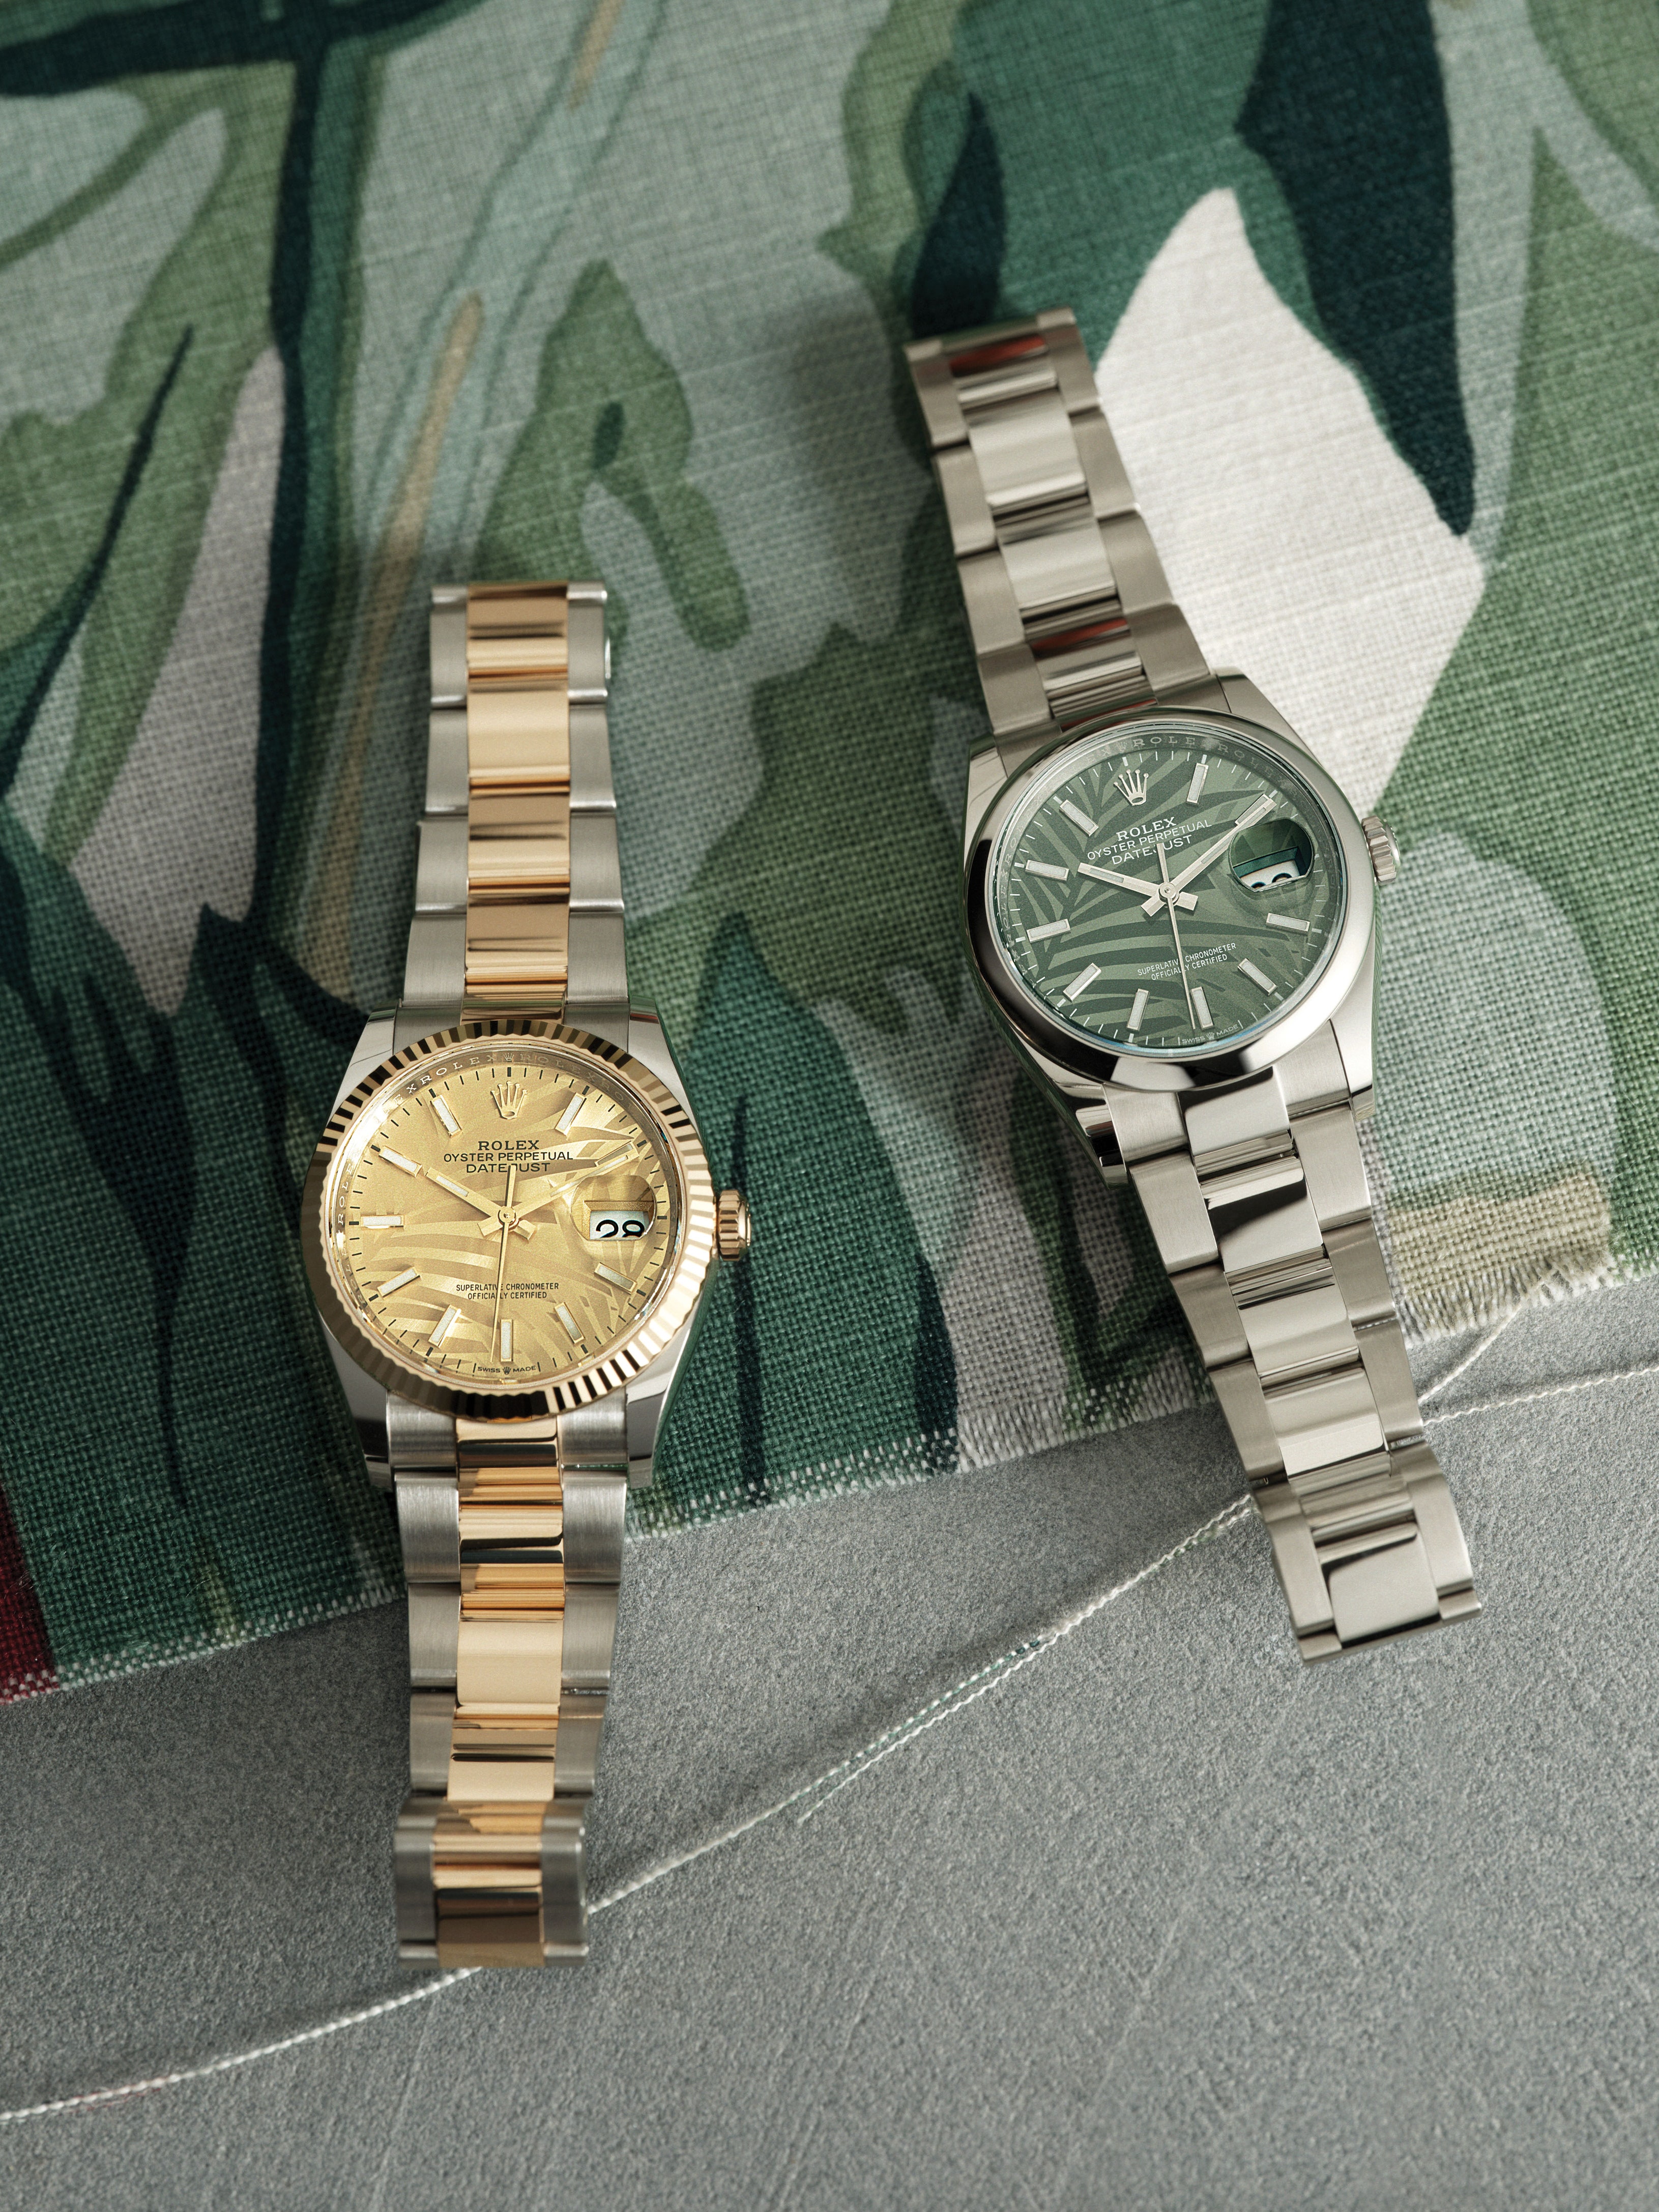 Rolex's New Collection Takes a Trip to the Tropics